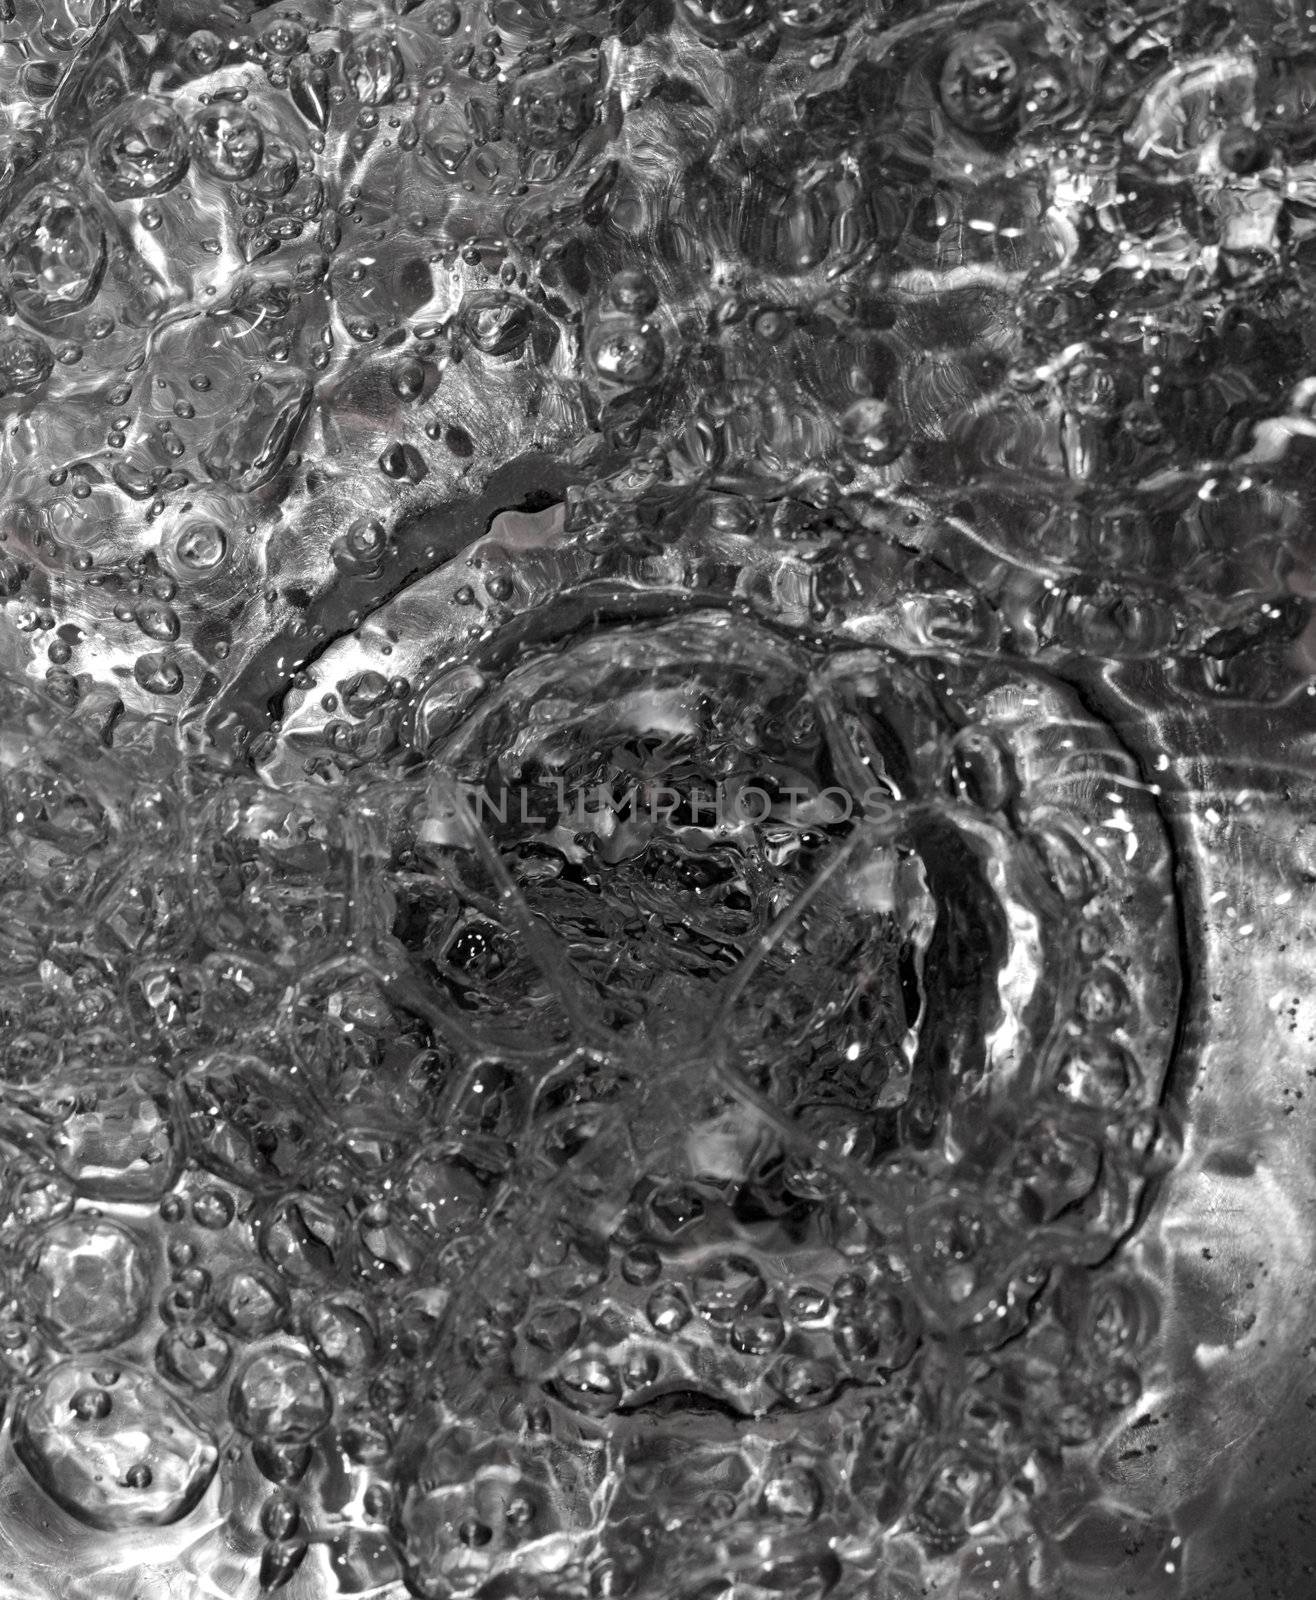 Metallic Kitchen sink water flow and drops shot from above, abstract -useful as background